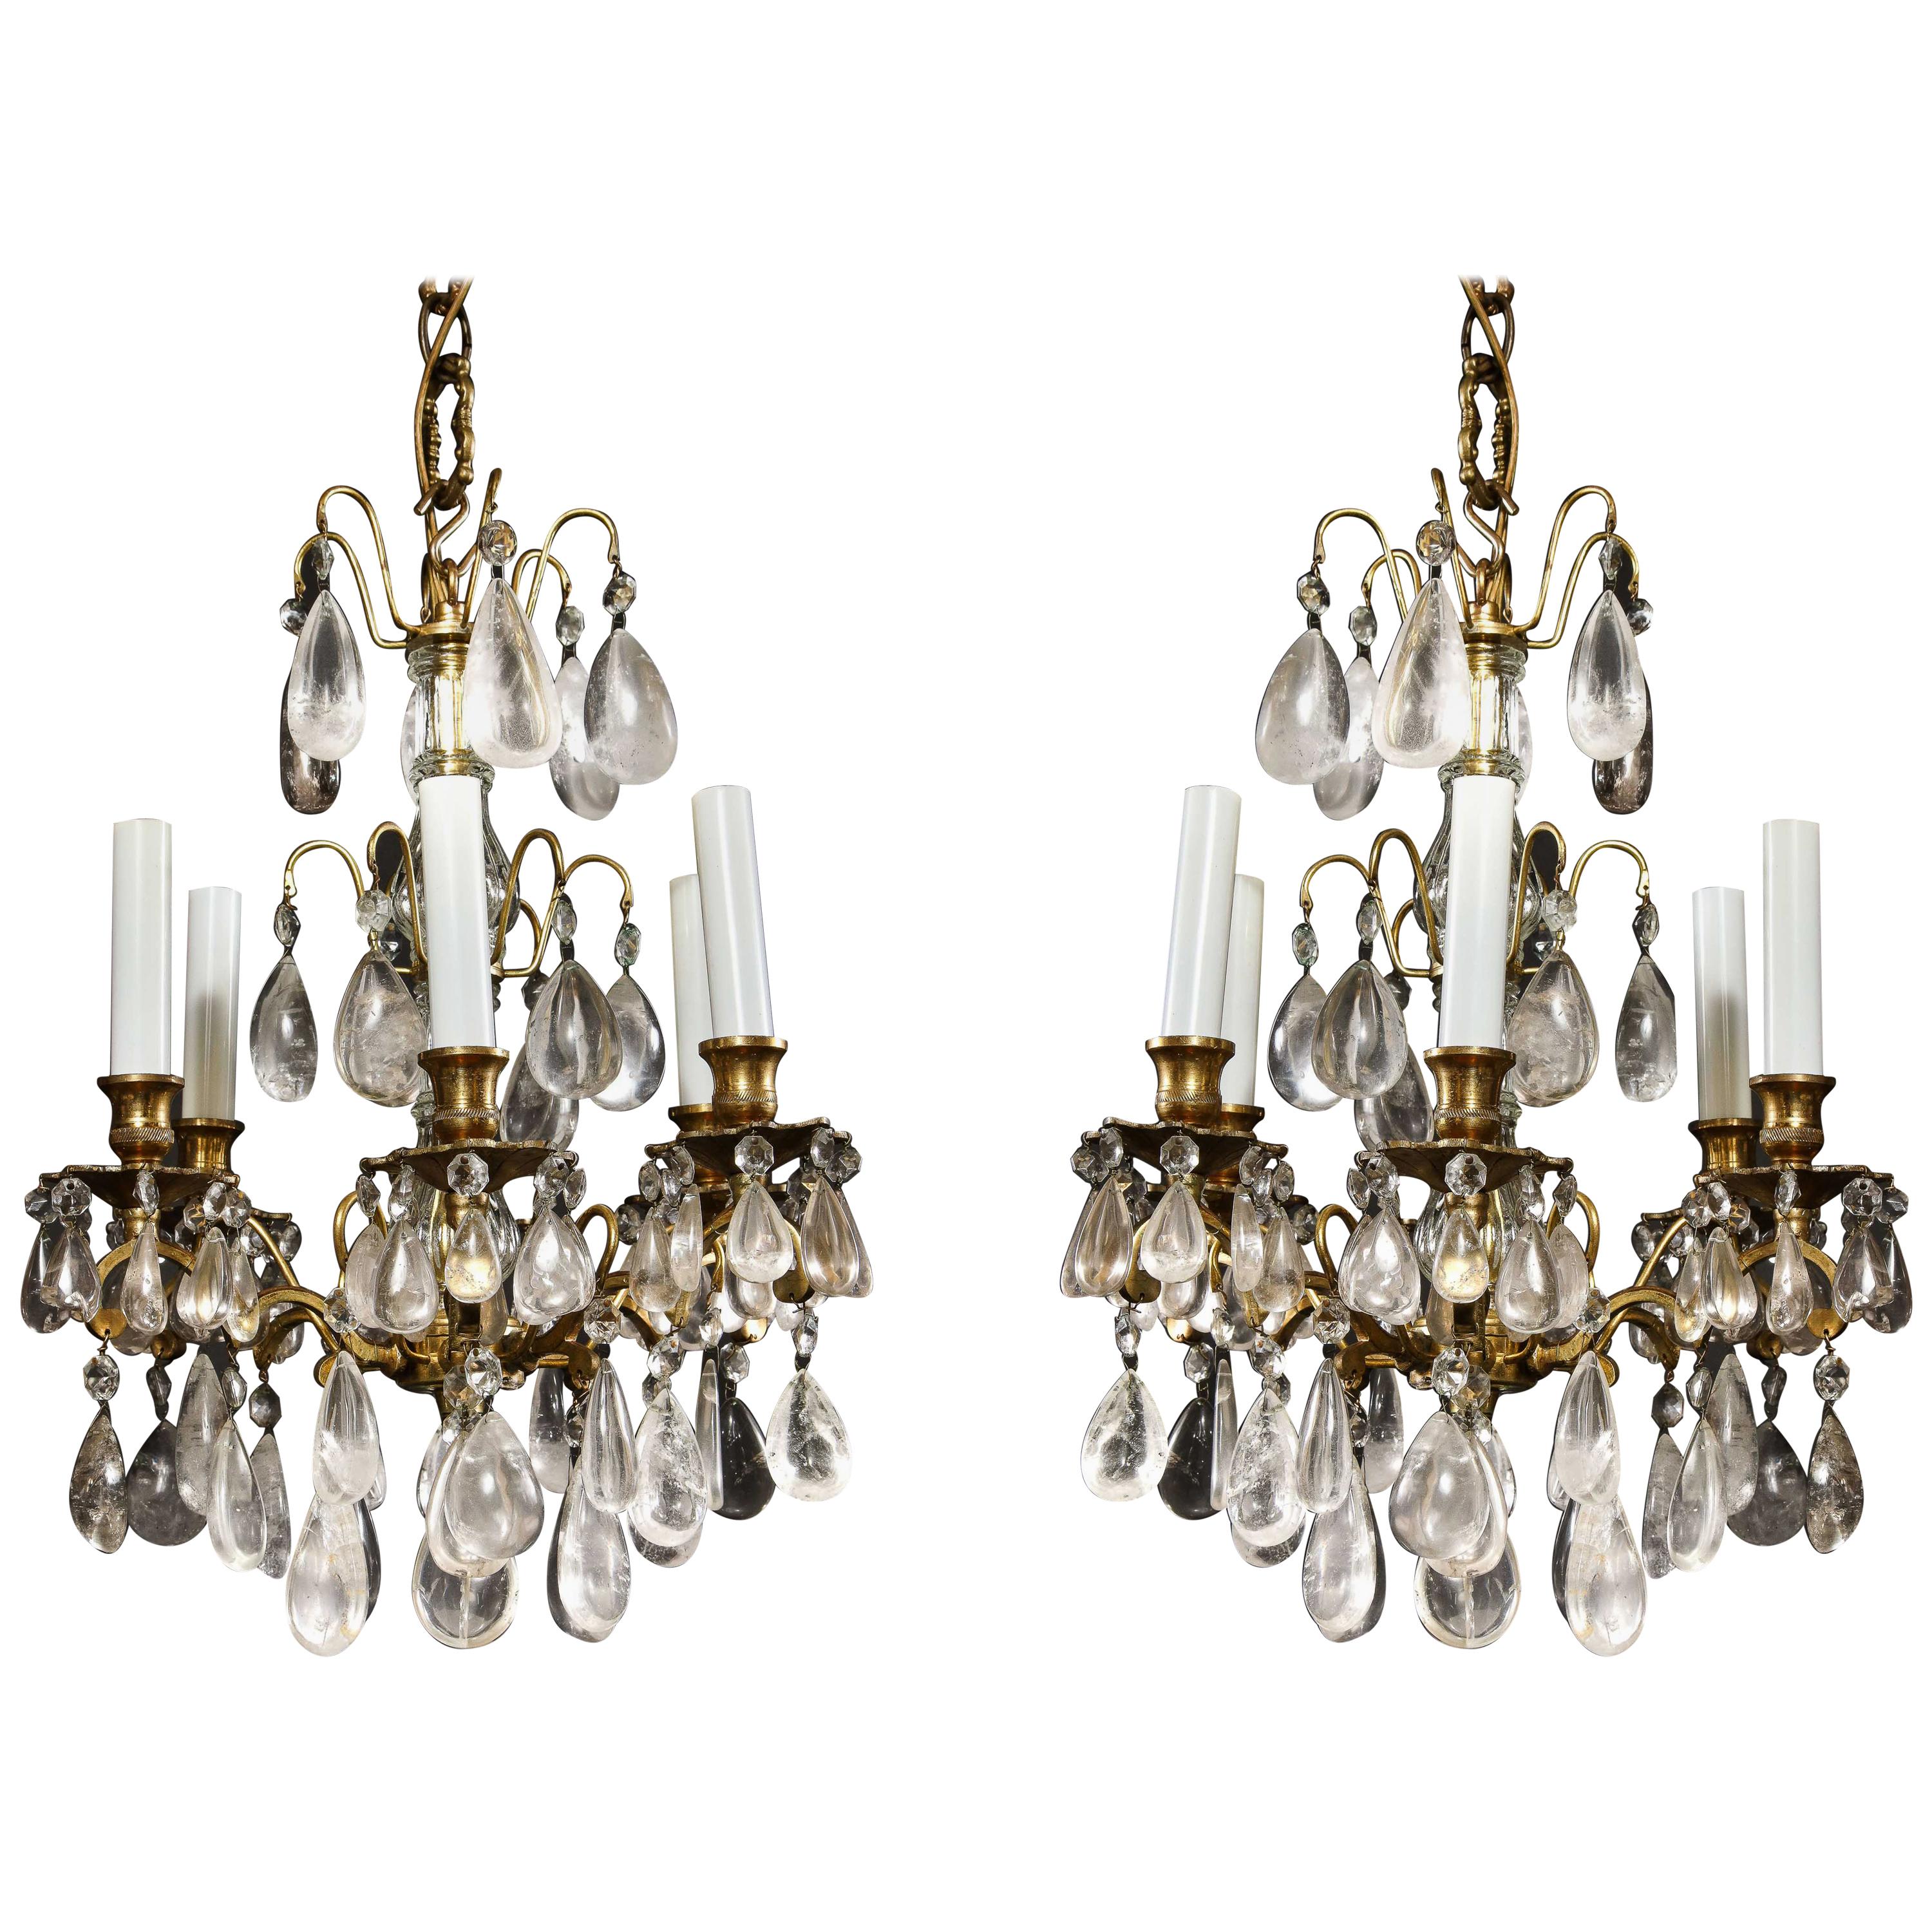 Pair of Fine Continental Louis XVI Style Rock Crystal Chandeliers